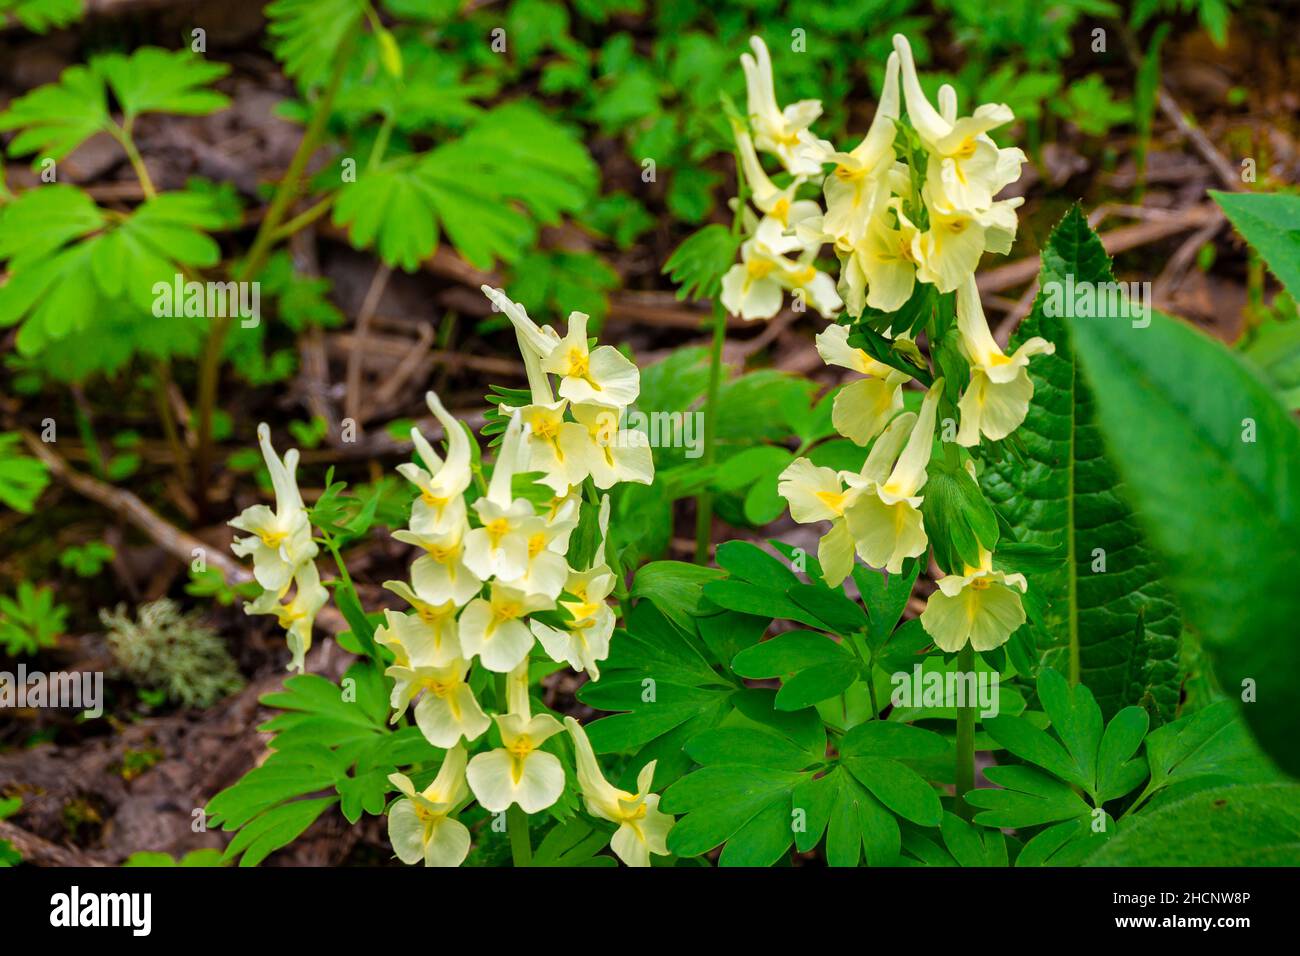 yellow flower blooming in early spring after snow melt, selective focus Stock Photo